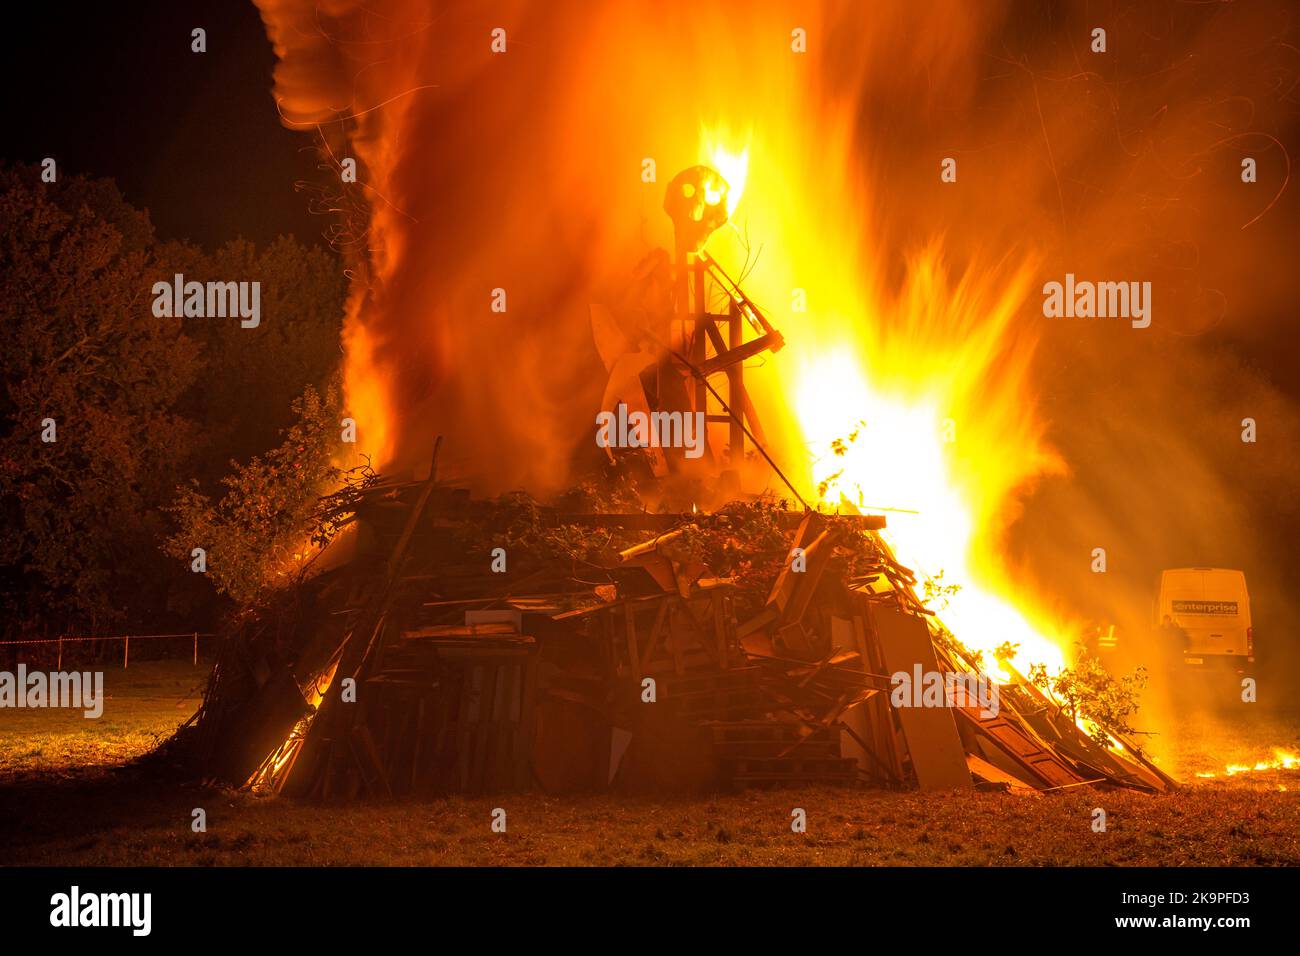 Rusthall, Tunbridge Wells, Kent, UK. 29 October 2022. A bonfire with firework display is lit on the village green of Rusthall where crowds gather for this free event. An effigy of the grim reaper is set on a large bonfire, to mark halloween and the start of bonfire season. ©Sarah Mott / Alamy Live News. Stock Photo